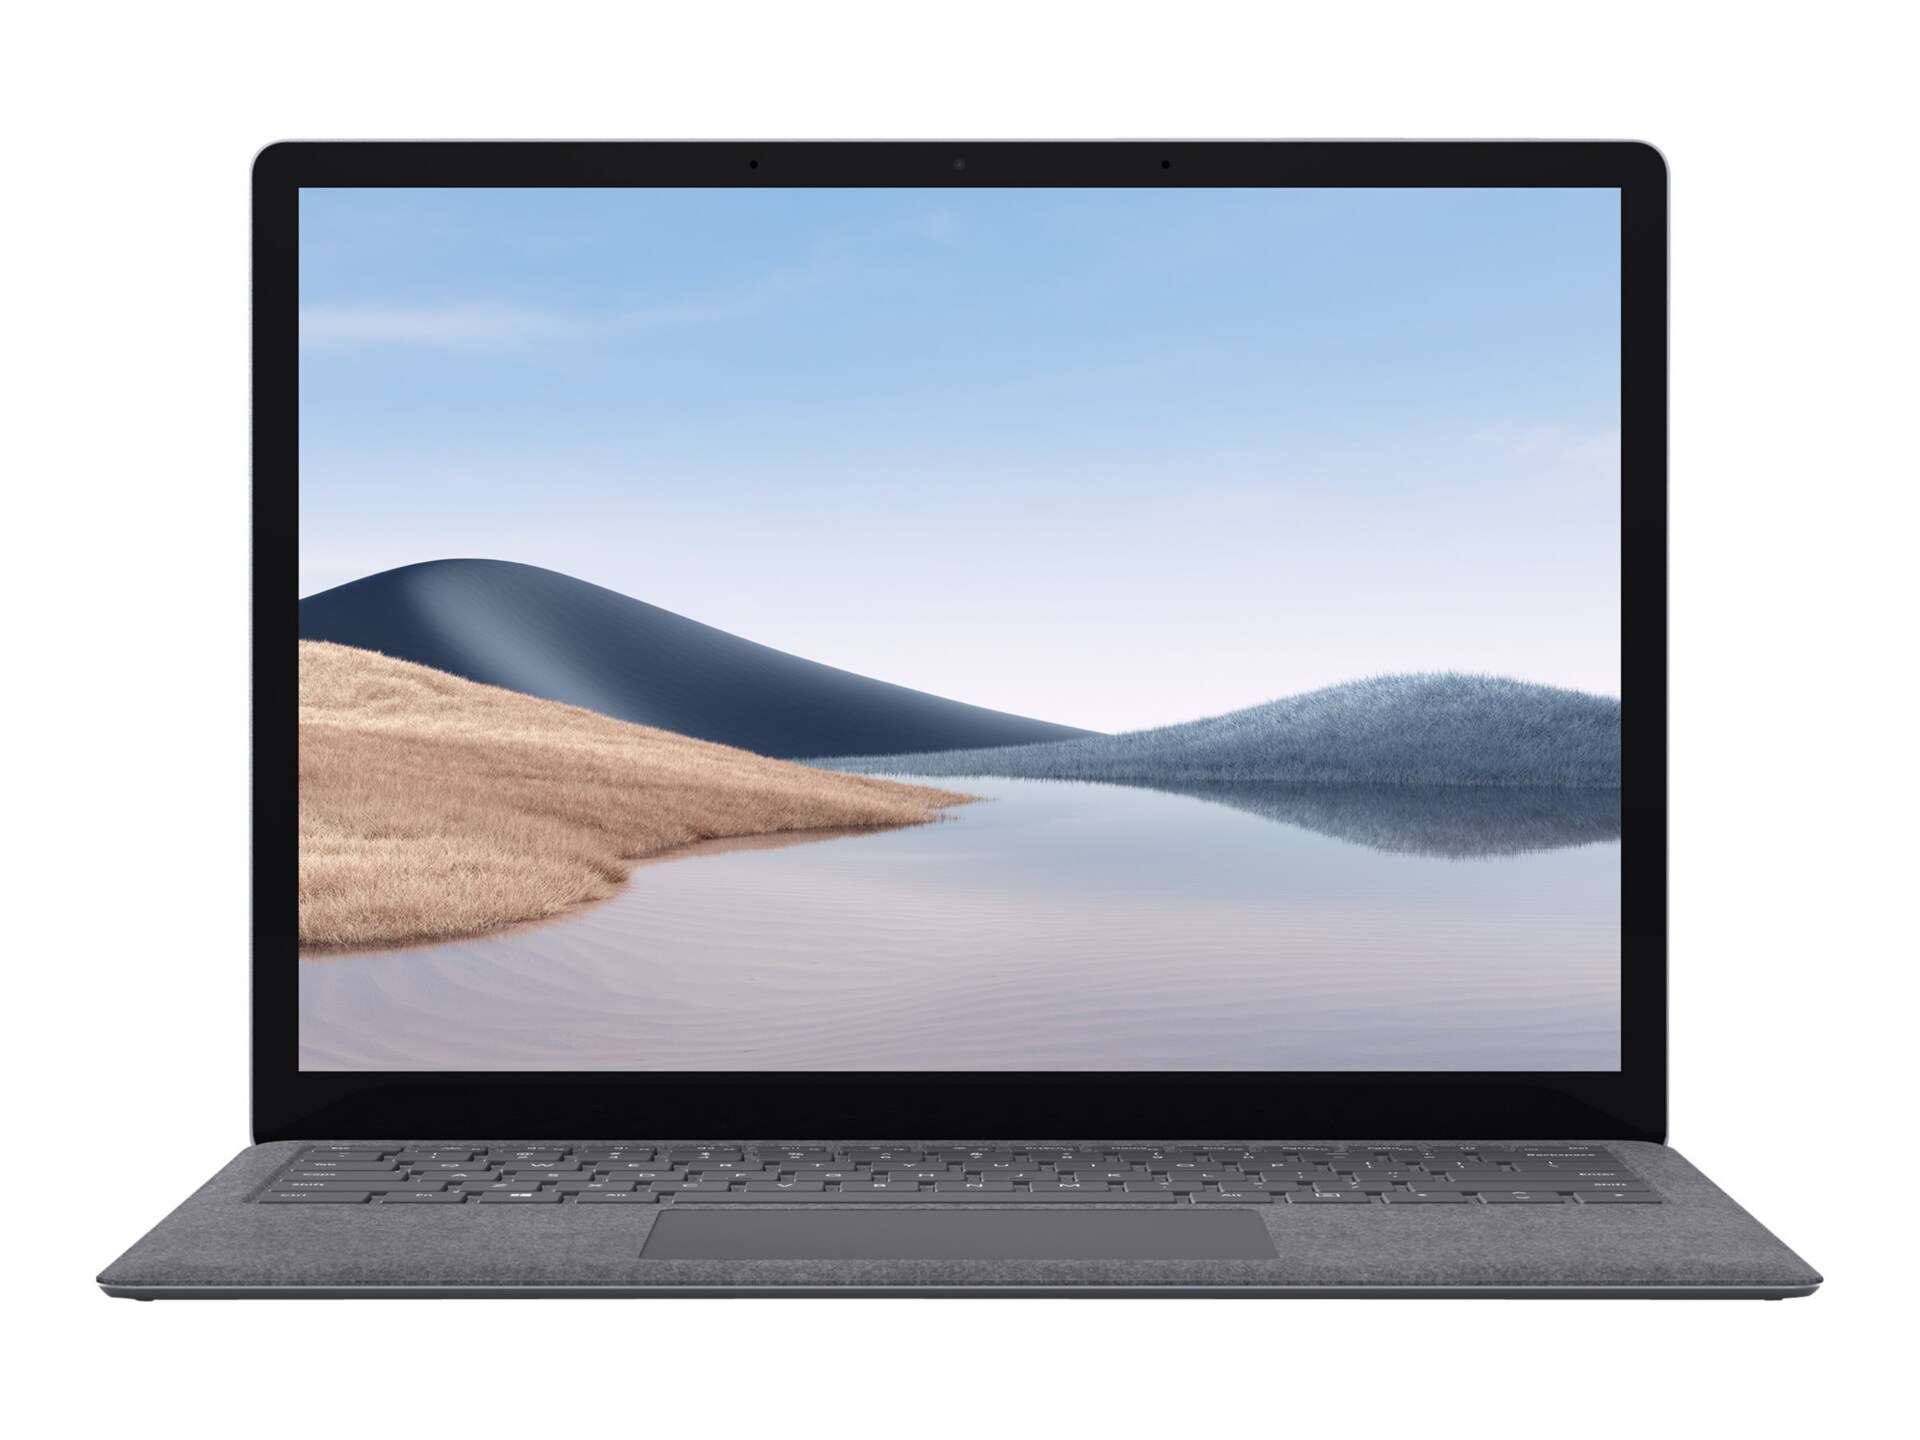 Microsoft Surface Laptop 4 for Business - 13.5" - Intel Core i5 - 1135G7 - 16 GB RAM - 512 GB SSD - QWERTY